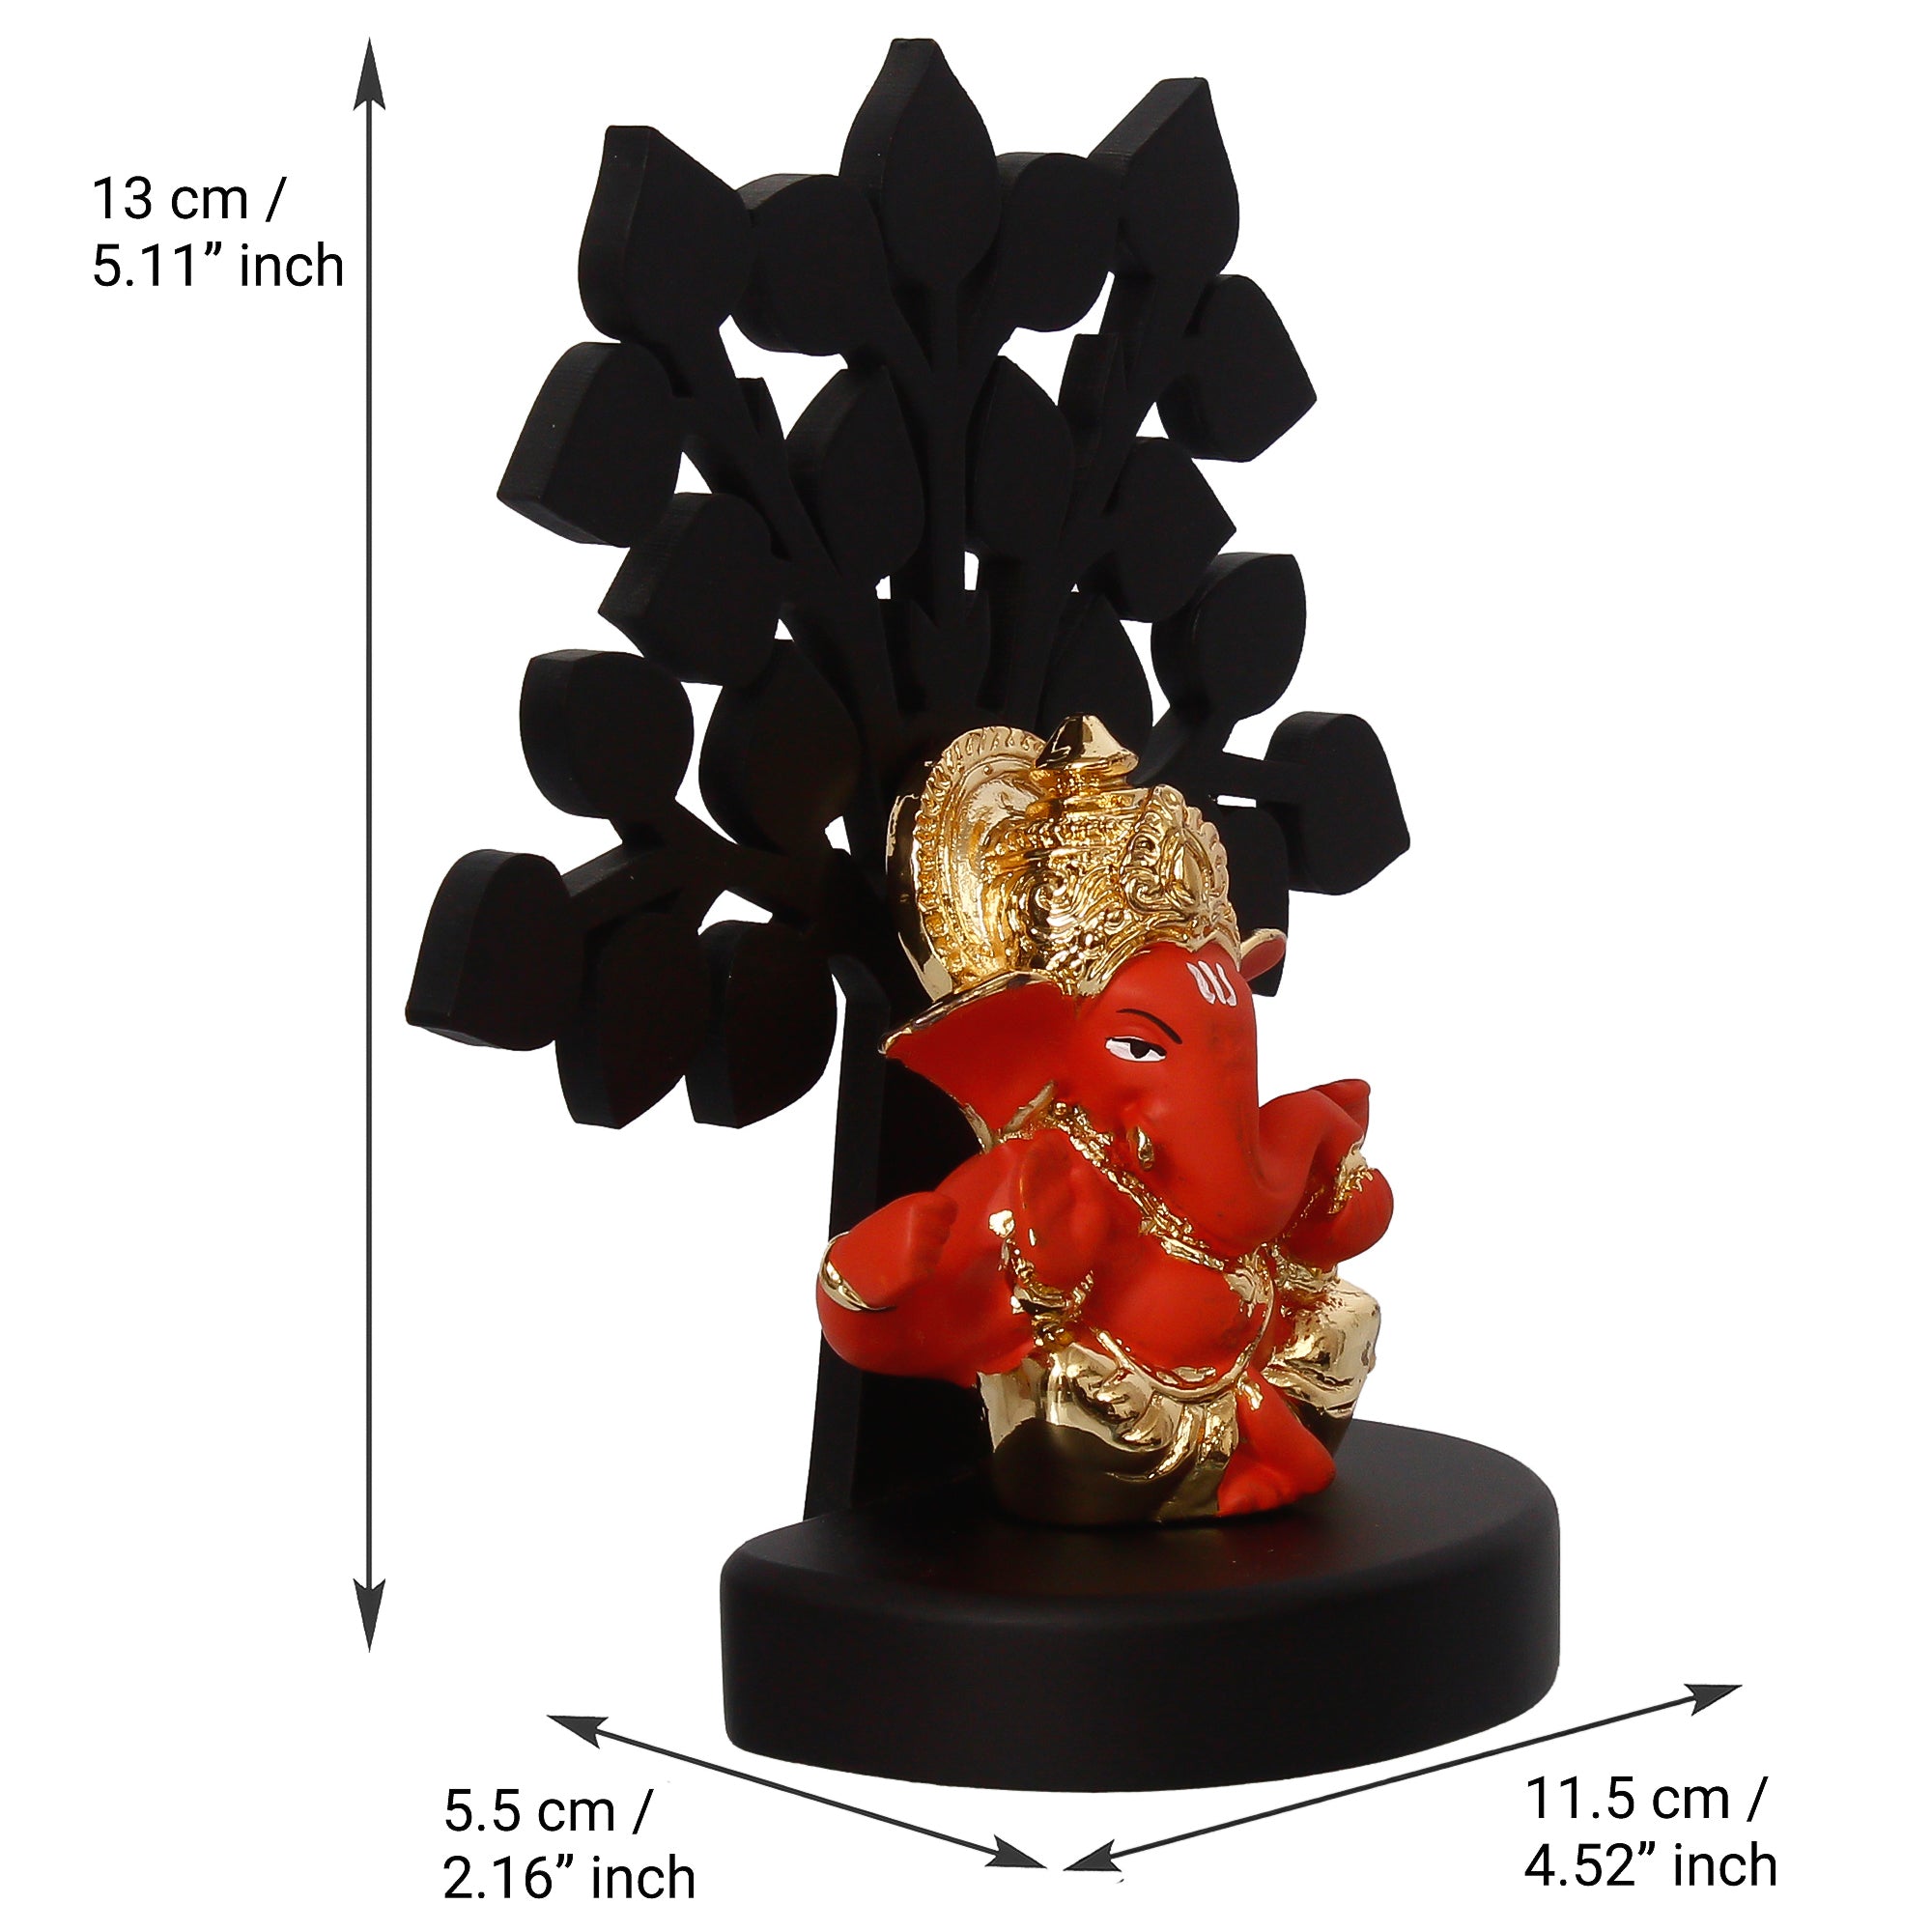 Gold Plated Orange Polyresin Ganesha Idol/Murti with Wooden Tree for Home, Temple, Office and Car Dashboard 4